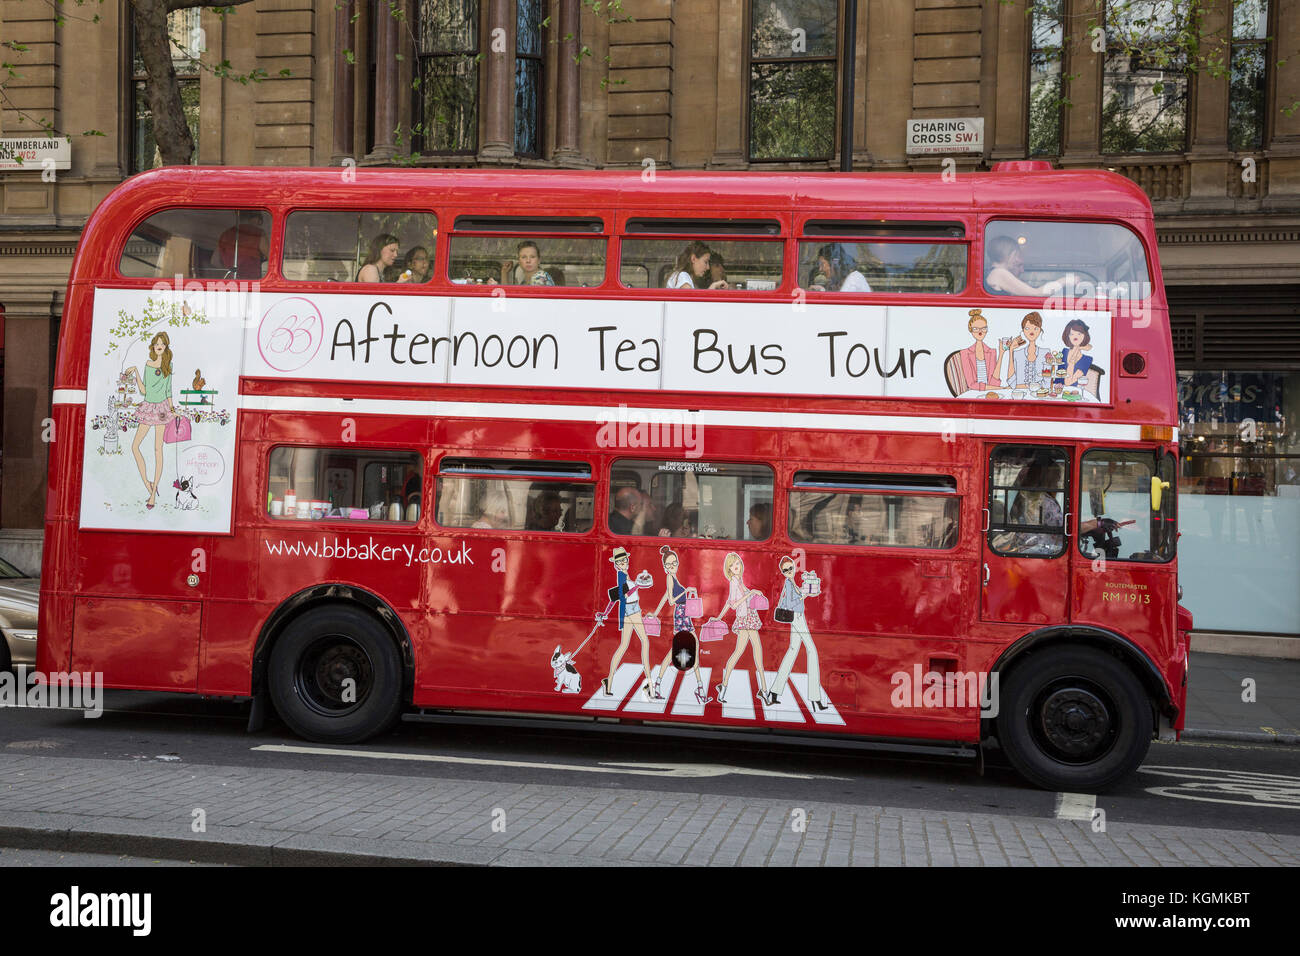 Red double decker London bus offering an afternoon tea bus tour, sightseeing, London, England, United Kingdom Stock Photo